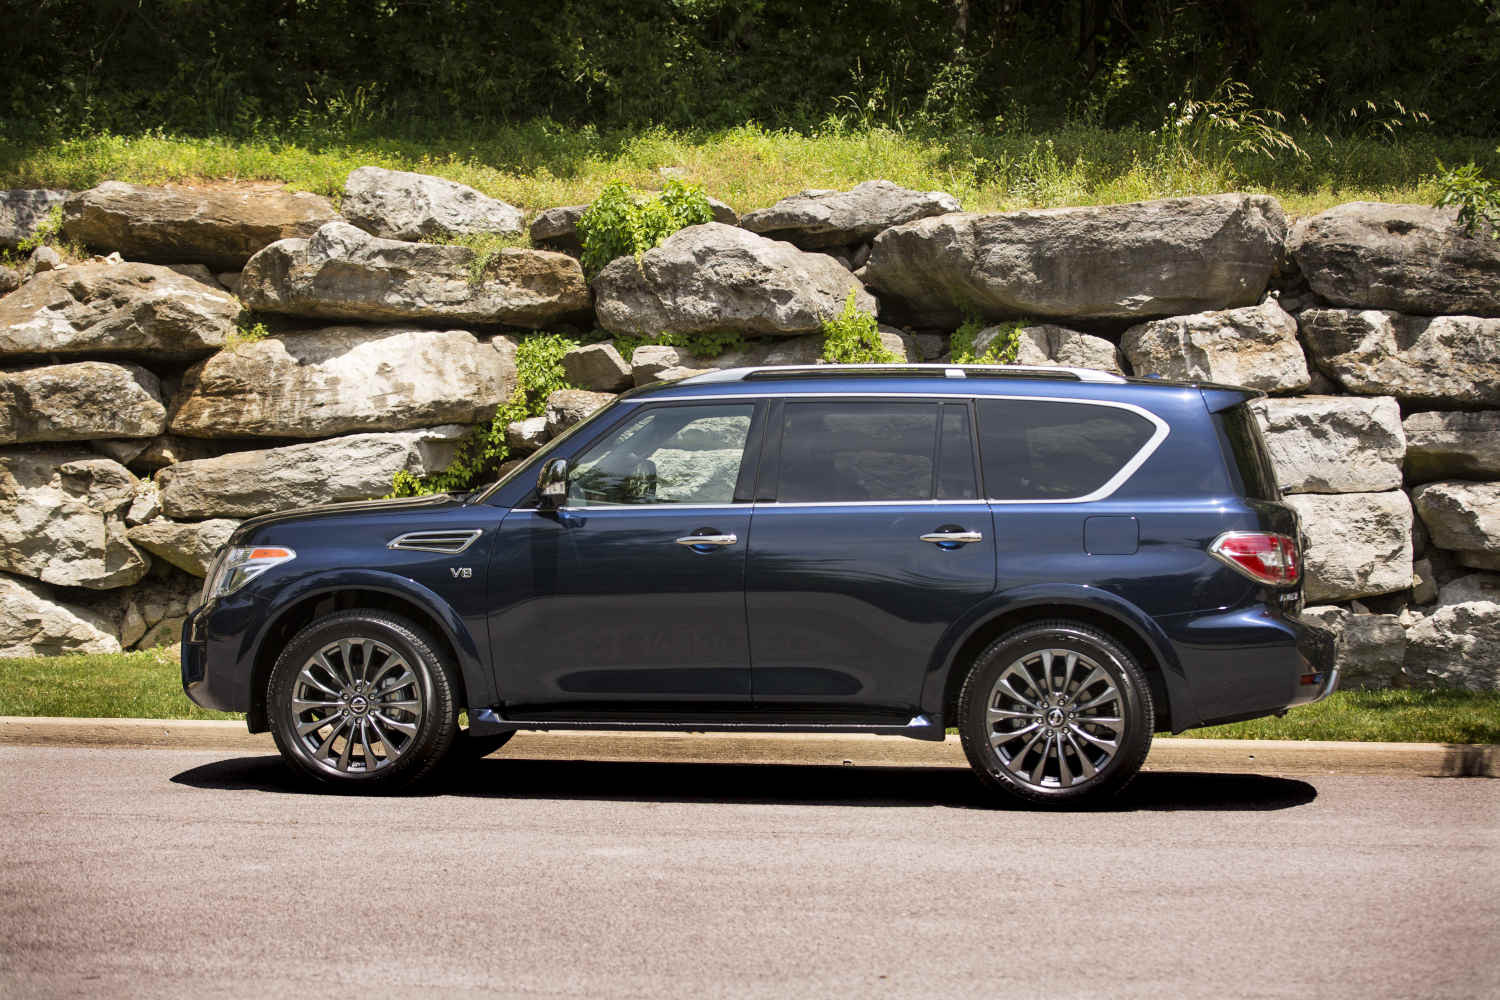 A reliable used SUV is this 2020 Nissan Armada